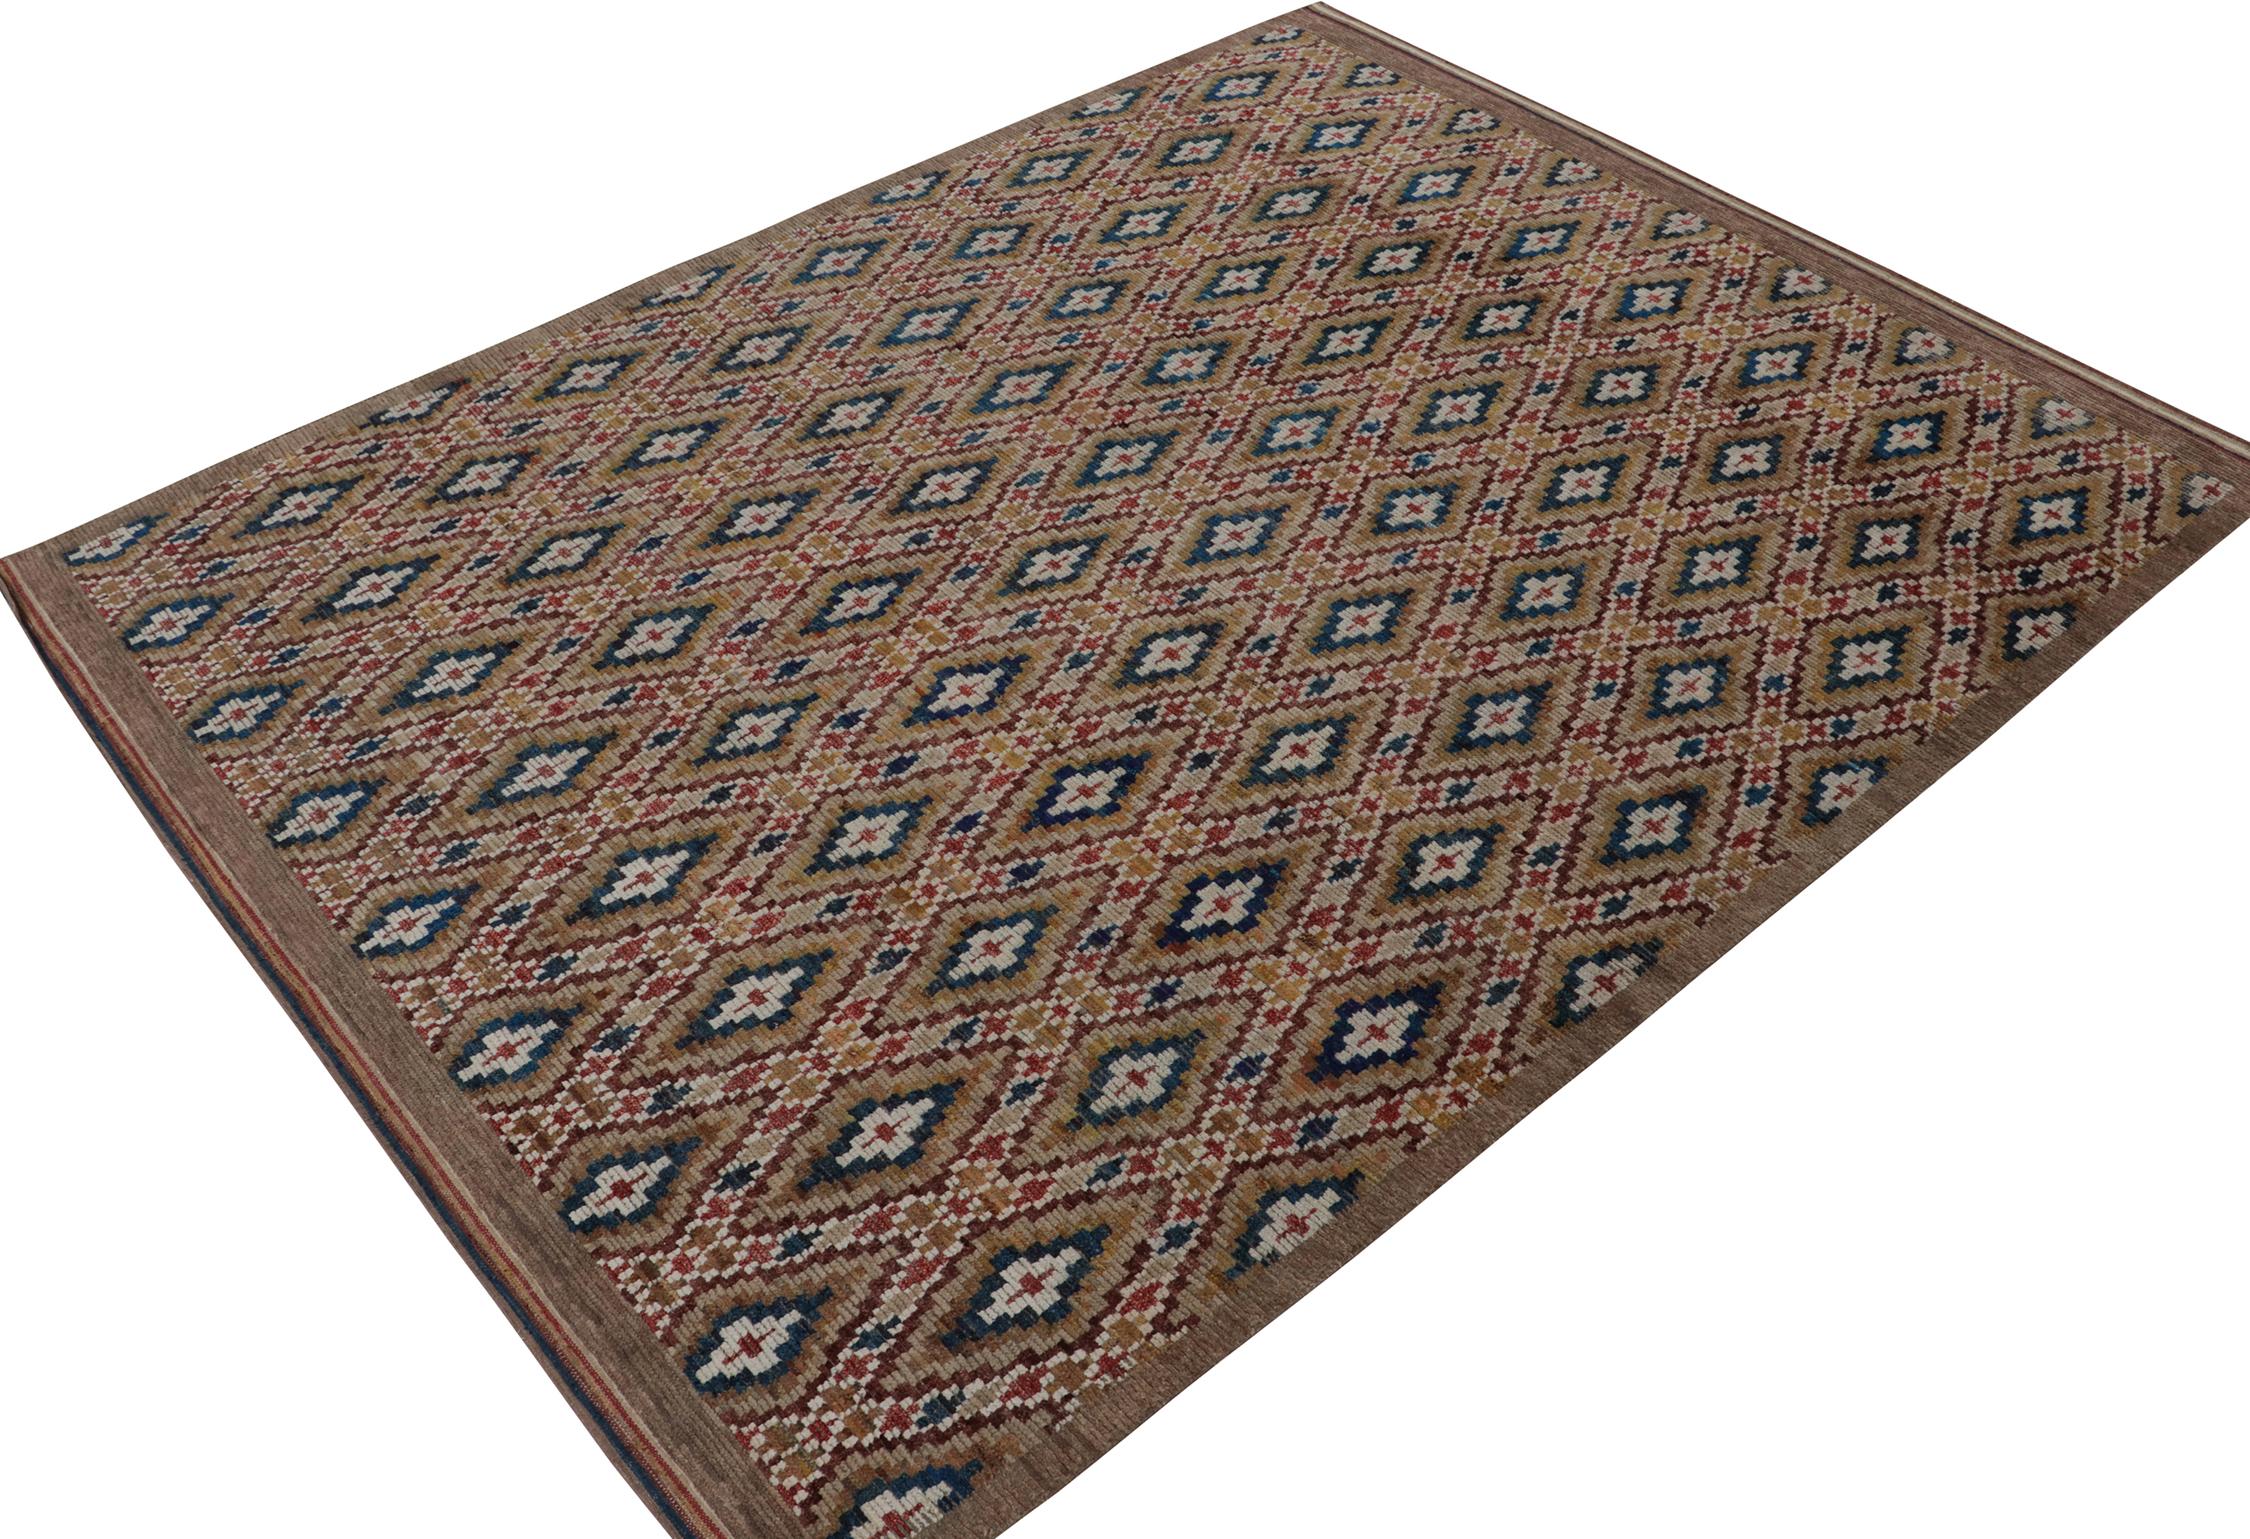 Rug & Kilim’s Moroccan style rug in Brown, Red and Blue Diamond Patterns
Description: This contemporary 9x12 rug is a grand entry in Rug & Kilim's new Moroccan Collection—a bold take on the iconic style. Hand-knotted in wool, silk, and